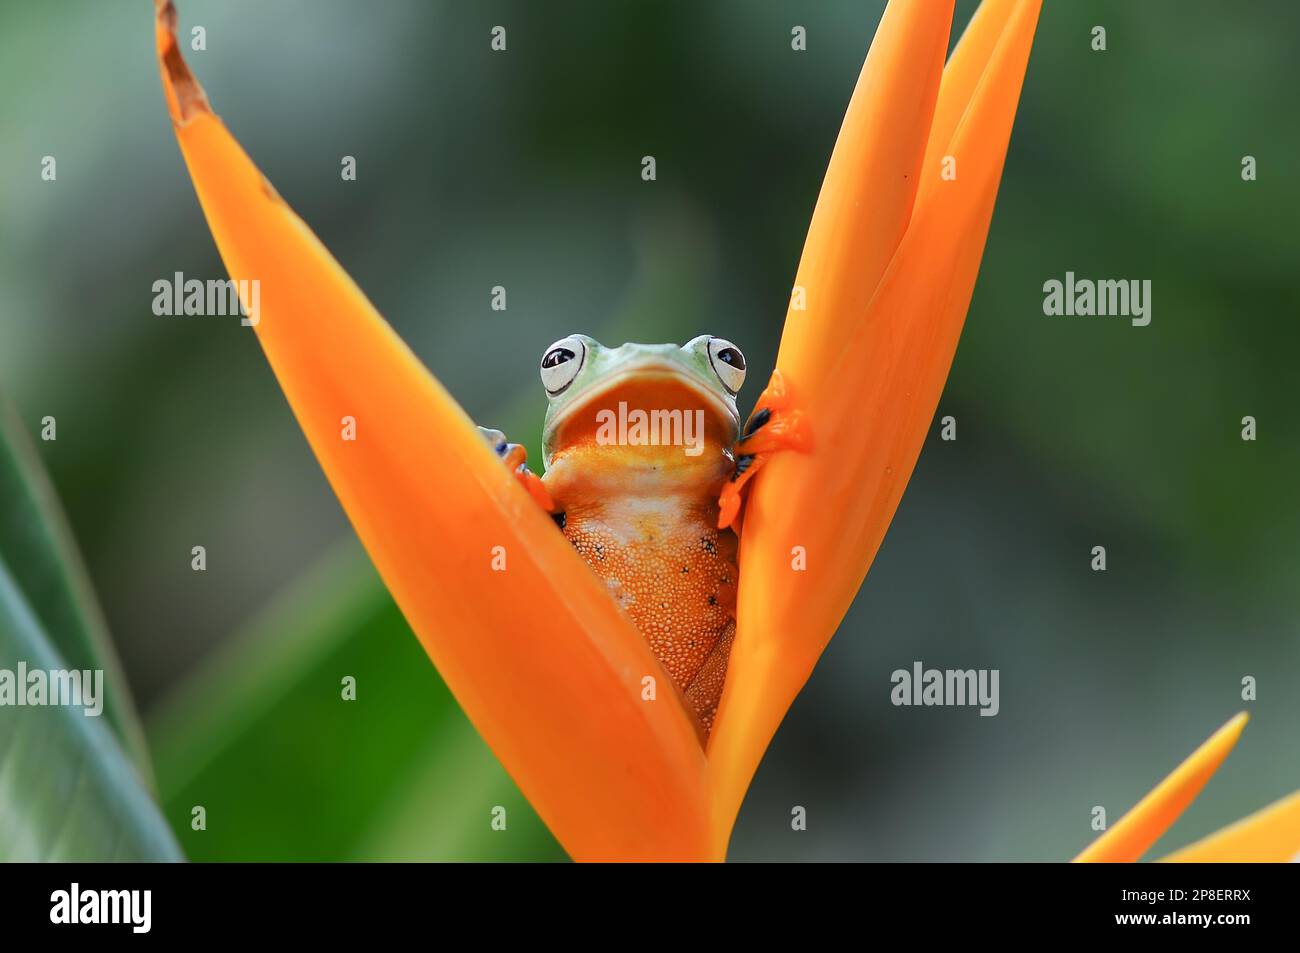 Frog sitting on a tropical flower, Indonesia Stock Photo